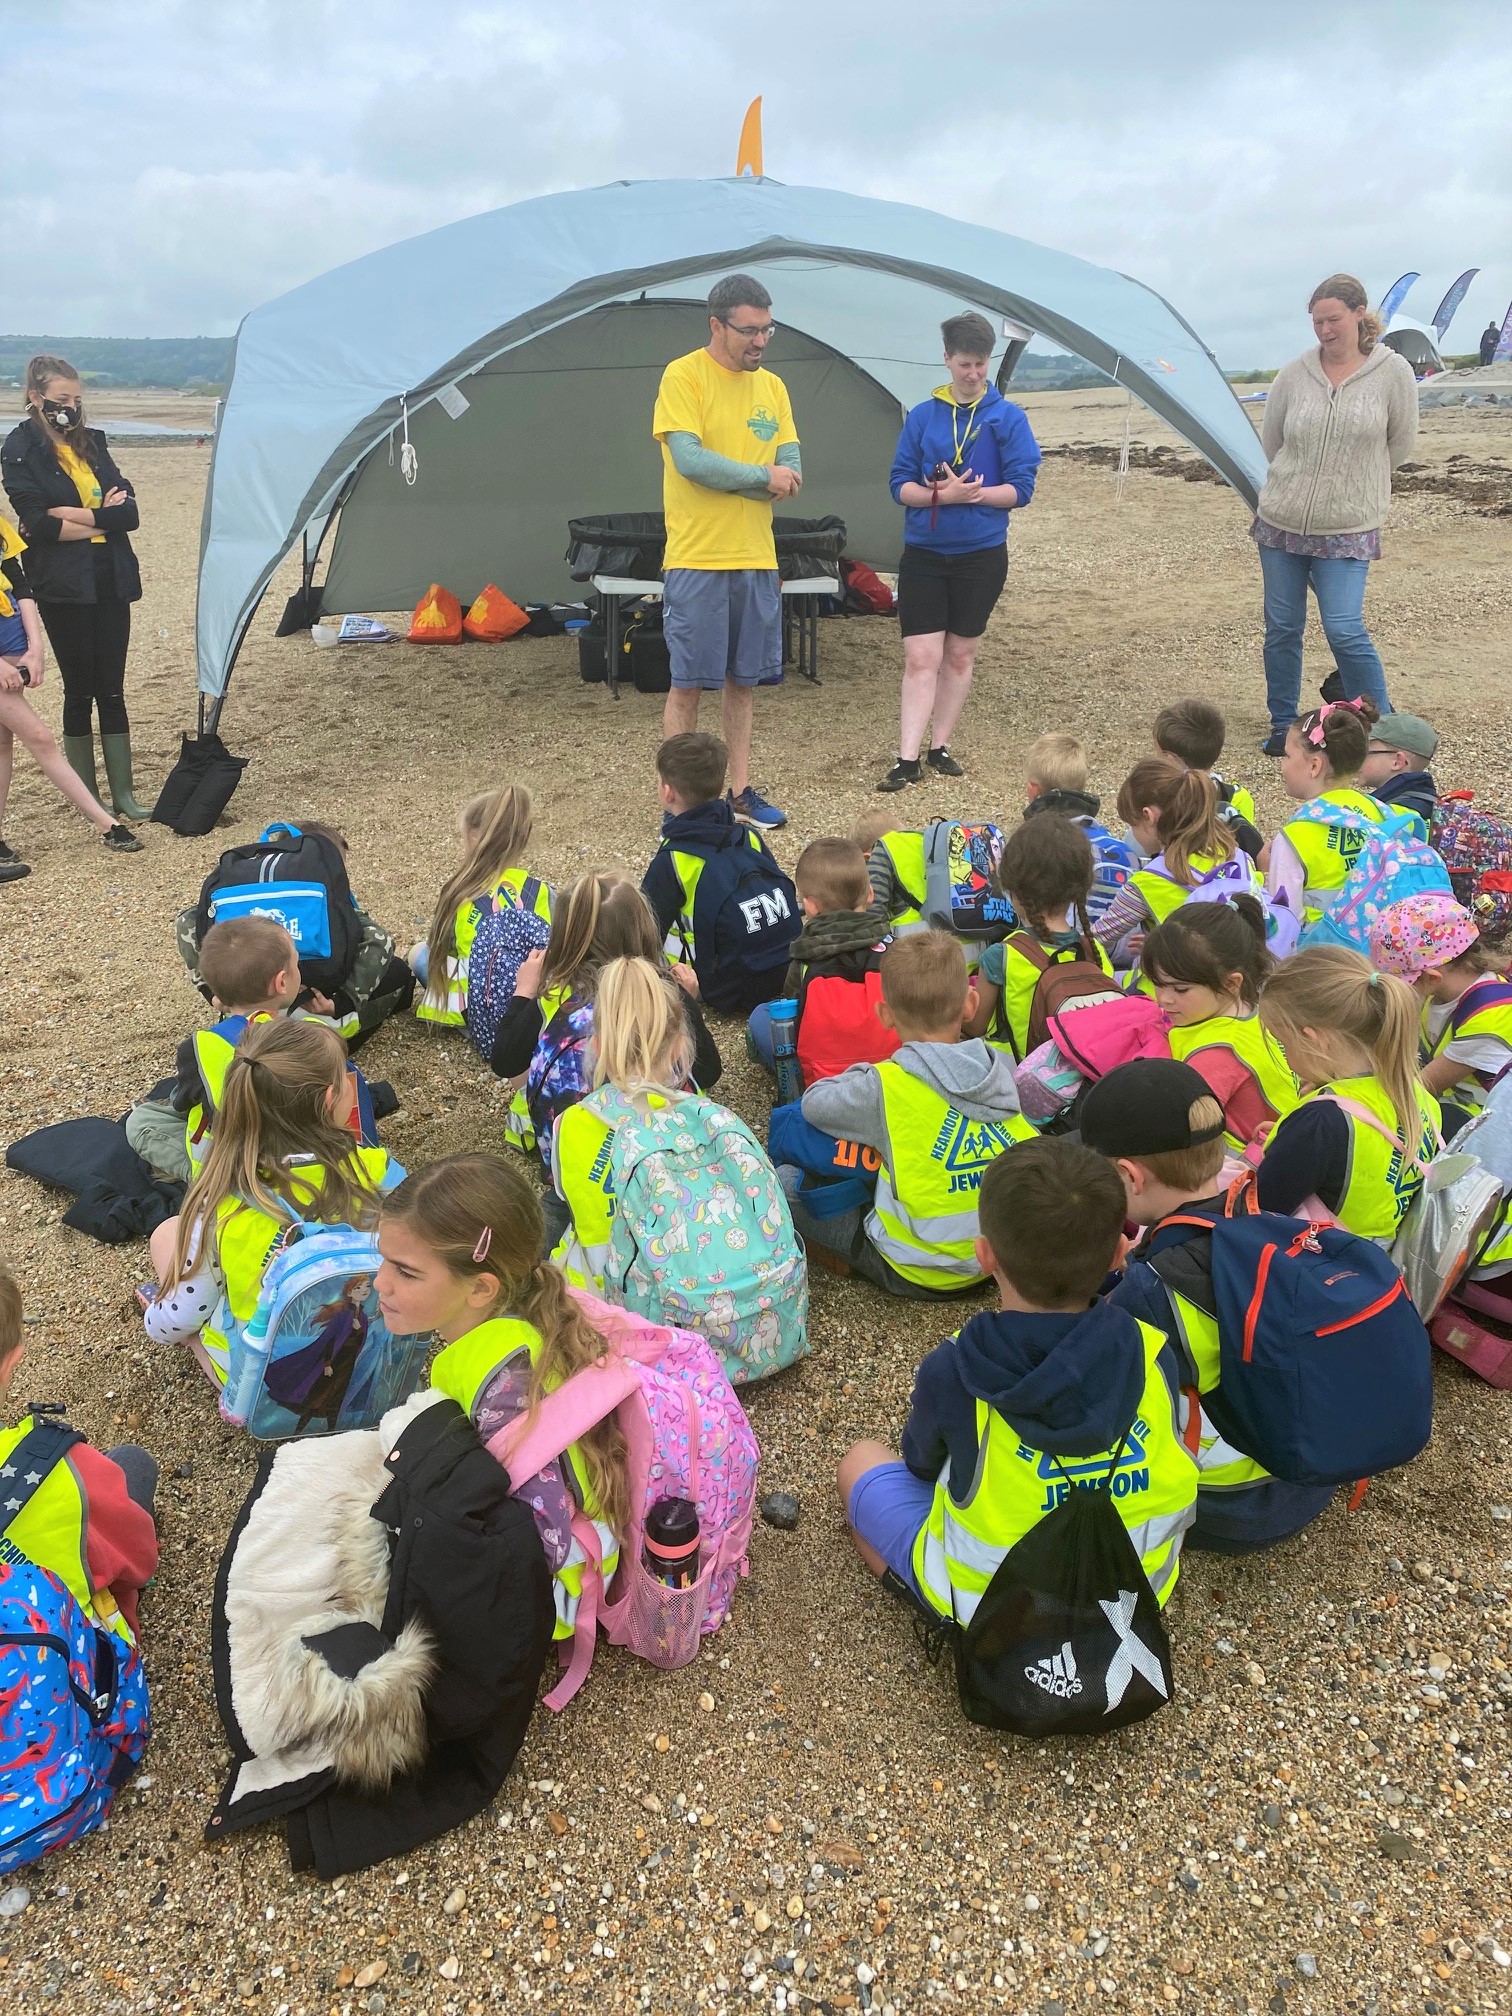 School Event - Beach Event - School activity - interactive learning - hands on learning